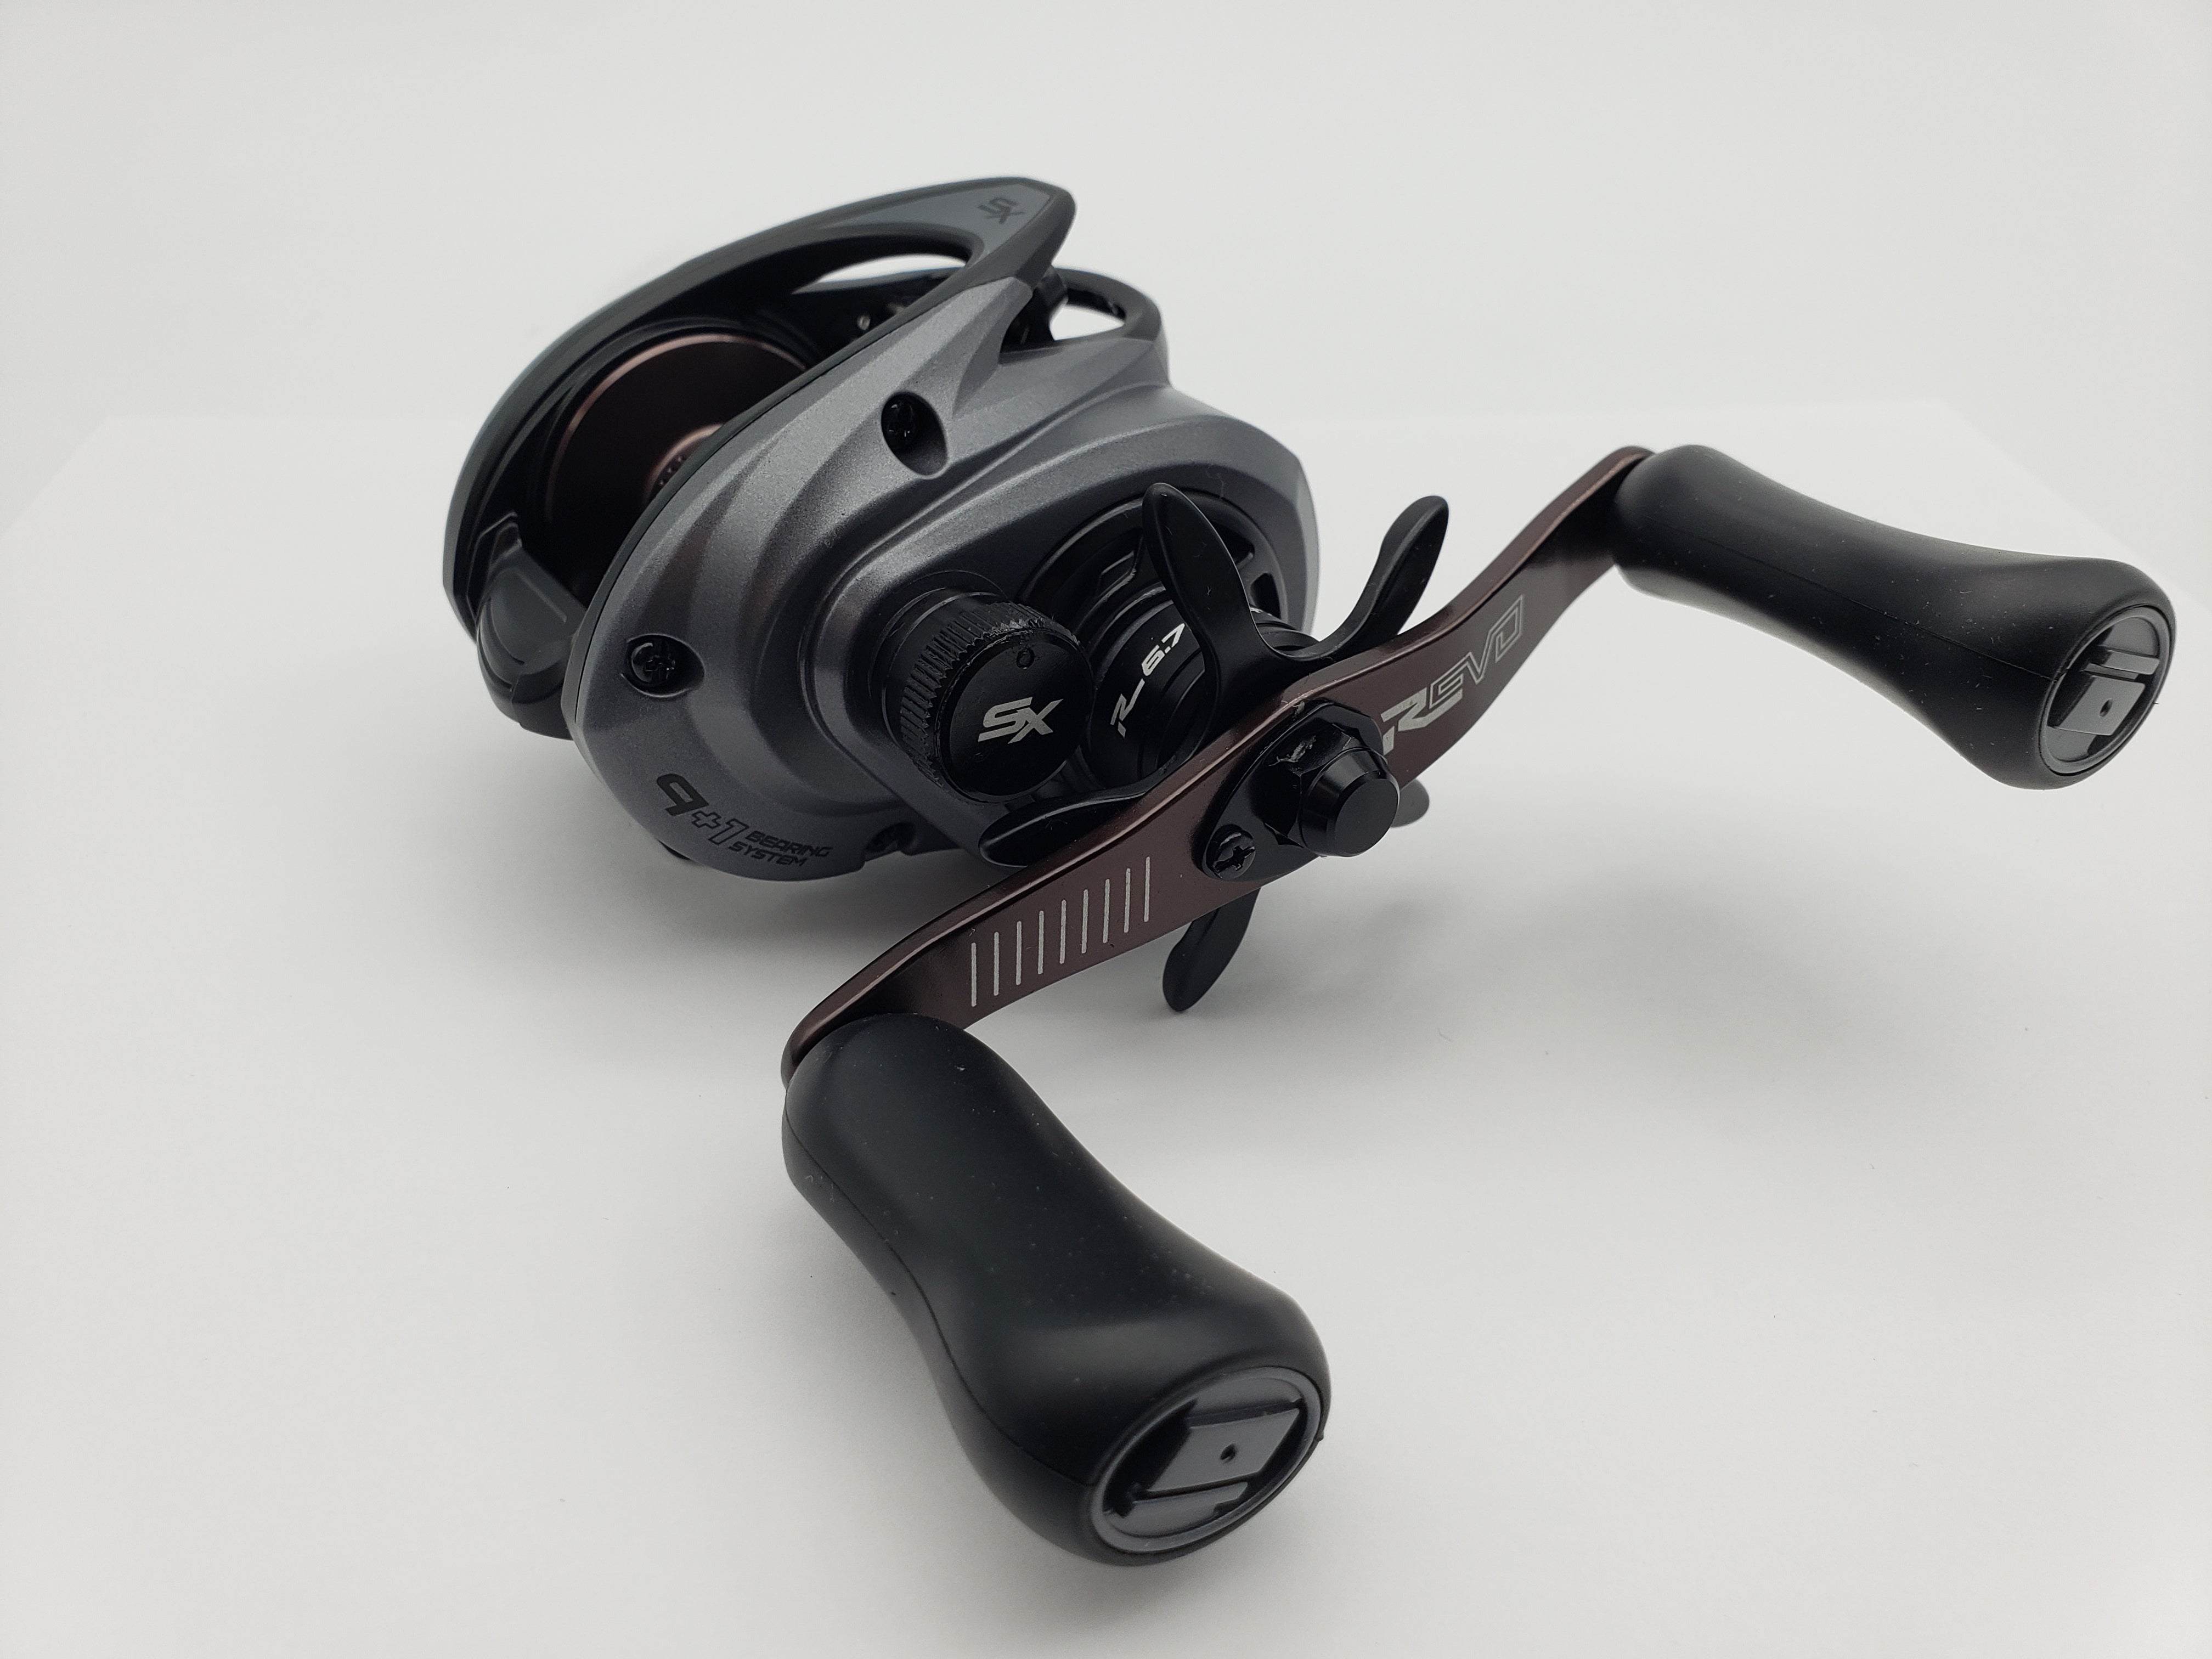 Best bait casting reels overall, Abu Garcia C3 and C4 